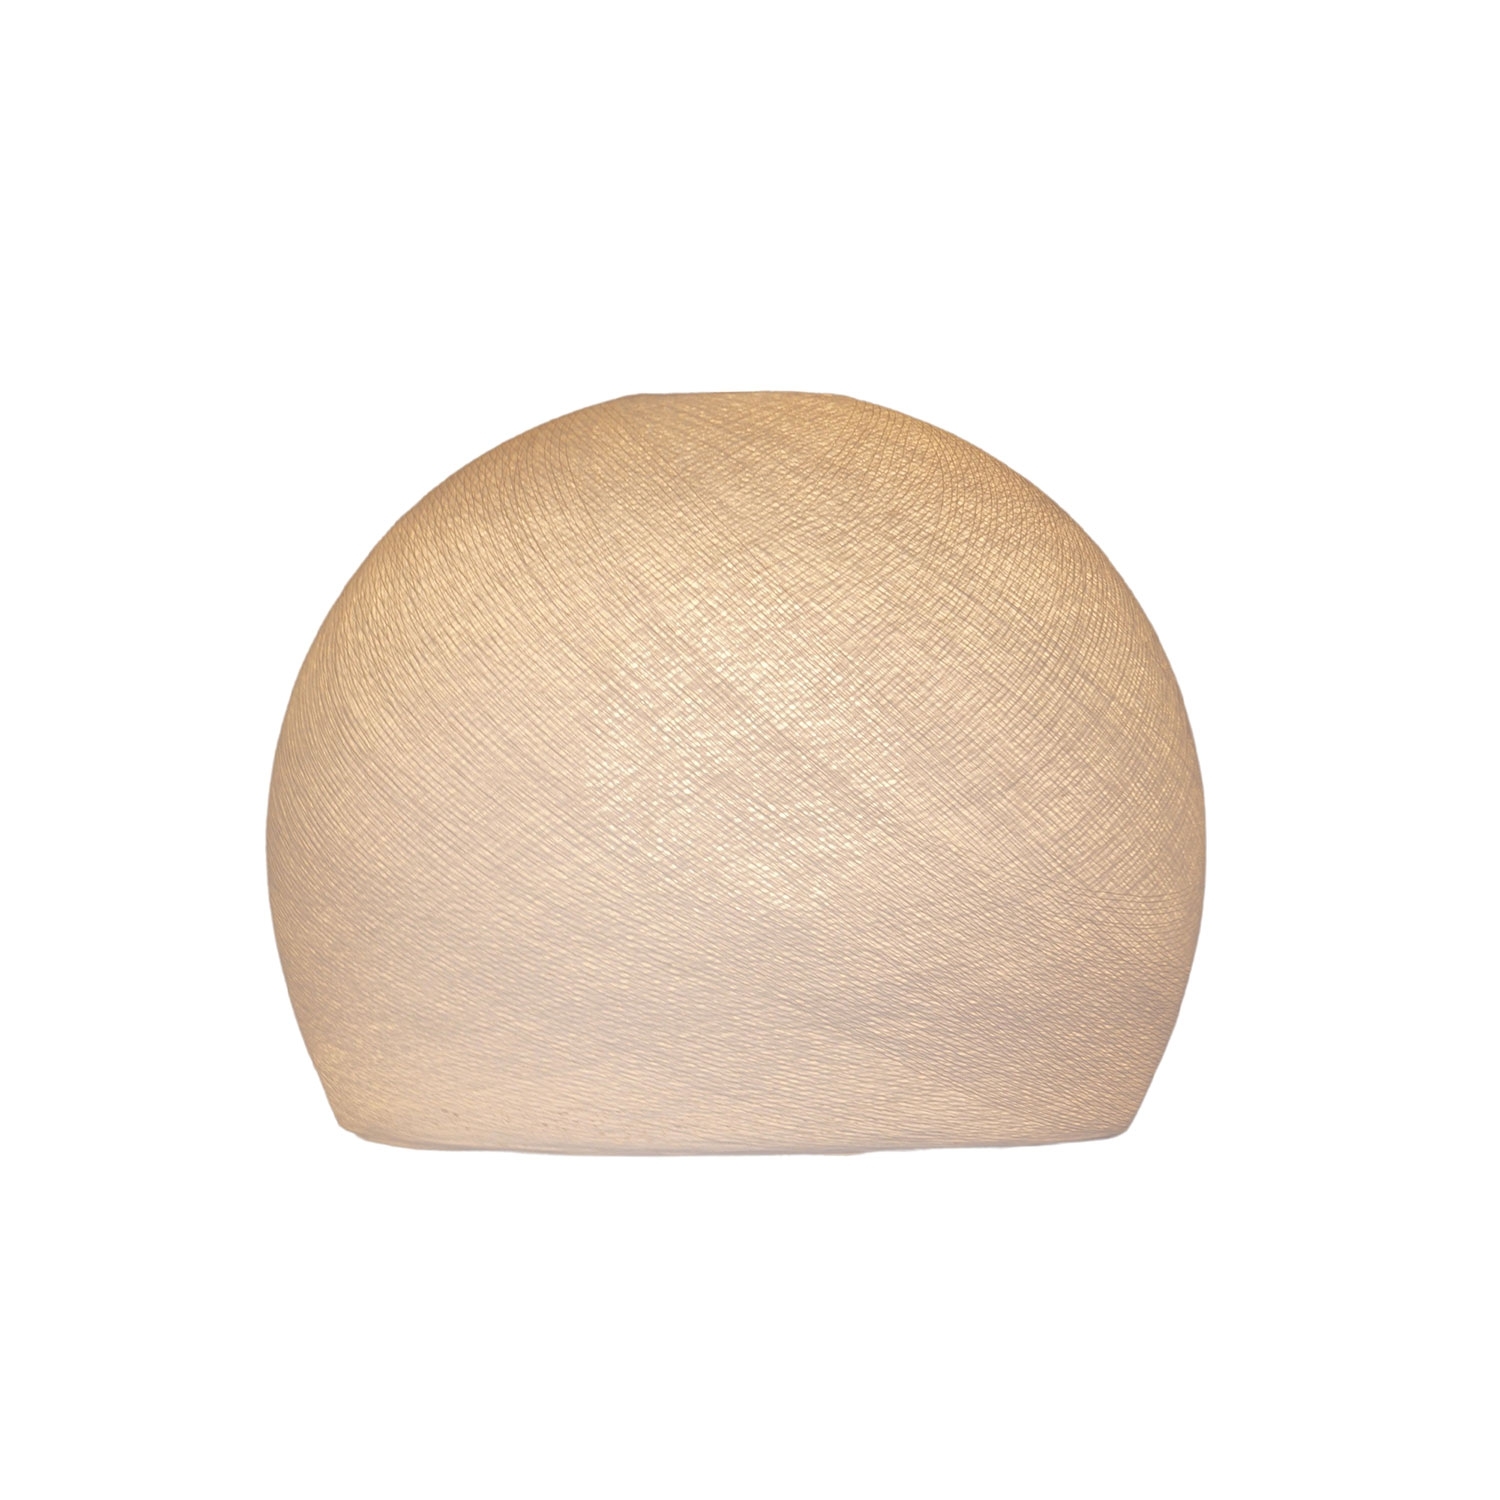 Dome Foldi Shades - Handmade pendant light shades - Available in 3 sizes & 16 colors